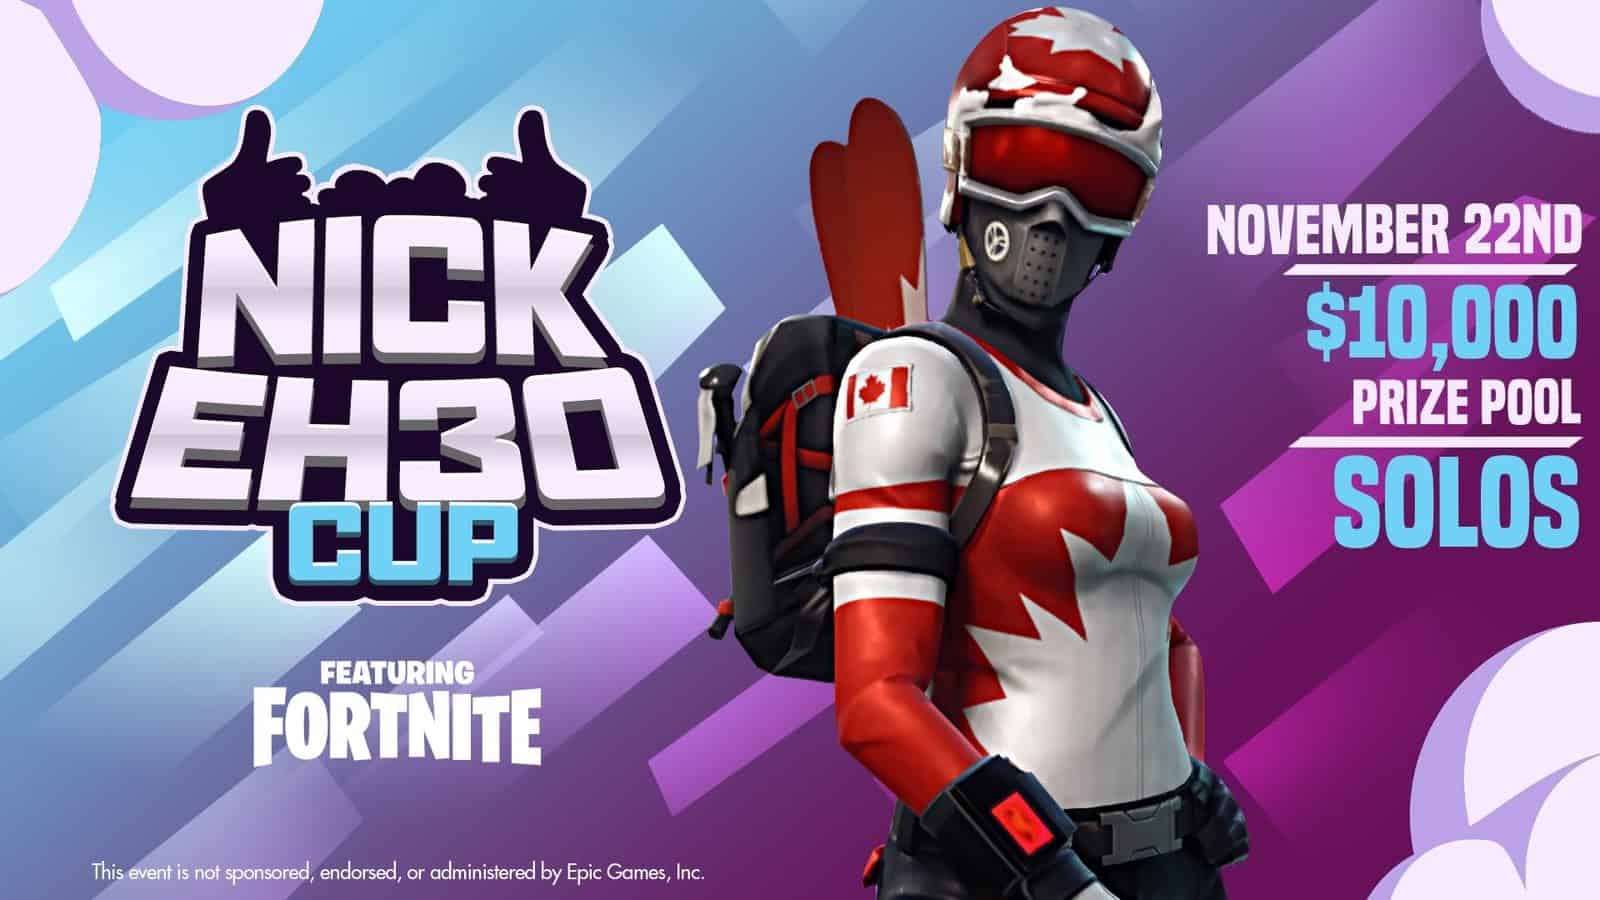 Fortnite: $10,000 Nick Eh 30 Cup Format, Scoring System, Dates, Prize Pool & More!